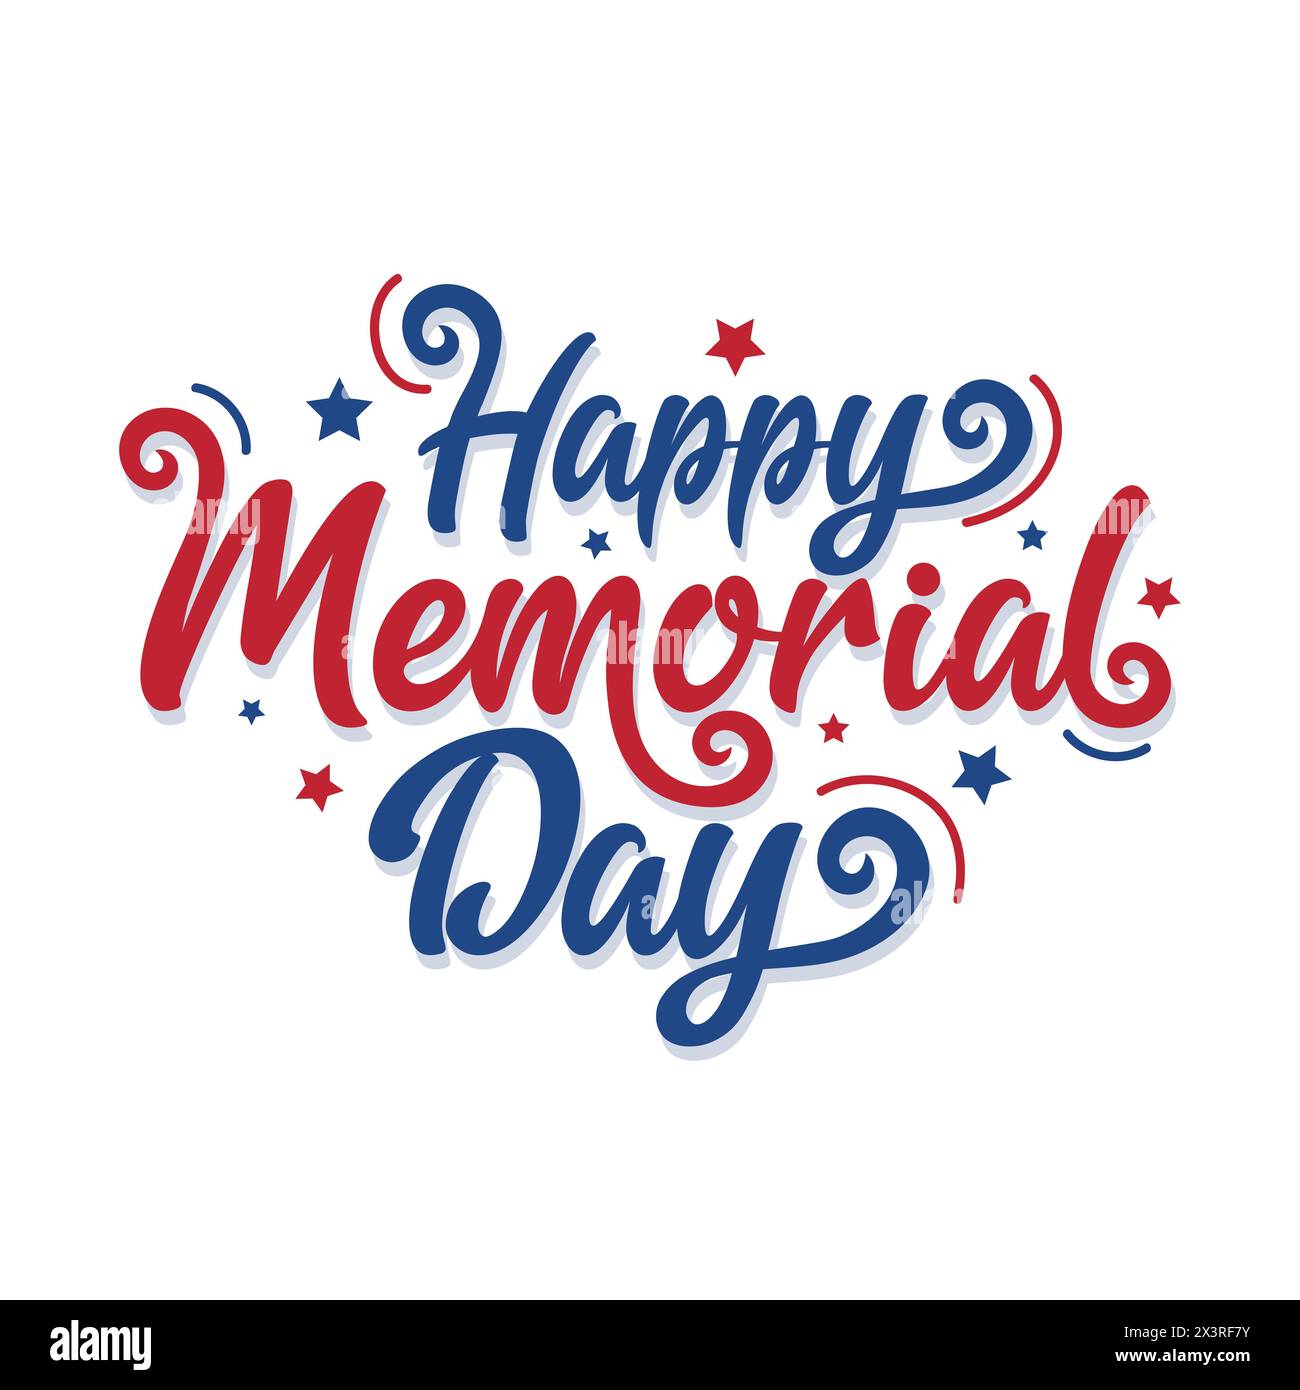 Red and blue color Happy Memorial Day hand drawn lettering for celebrating American national military holiday. Star vectors. Memorial Day logo, poster Stock Vector